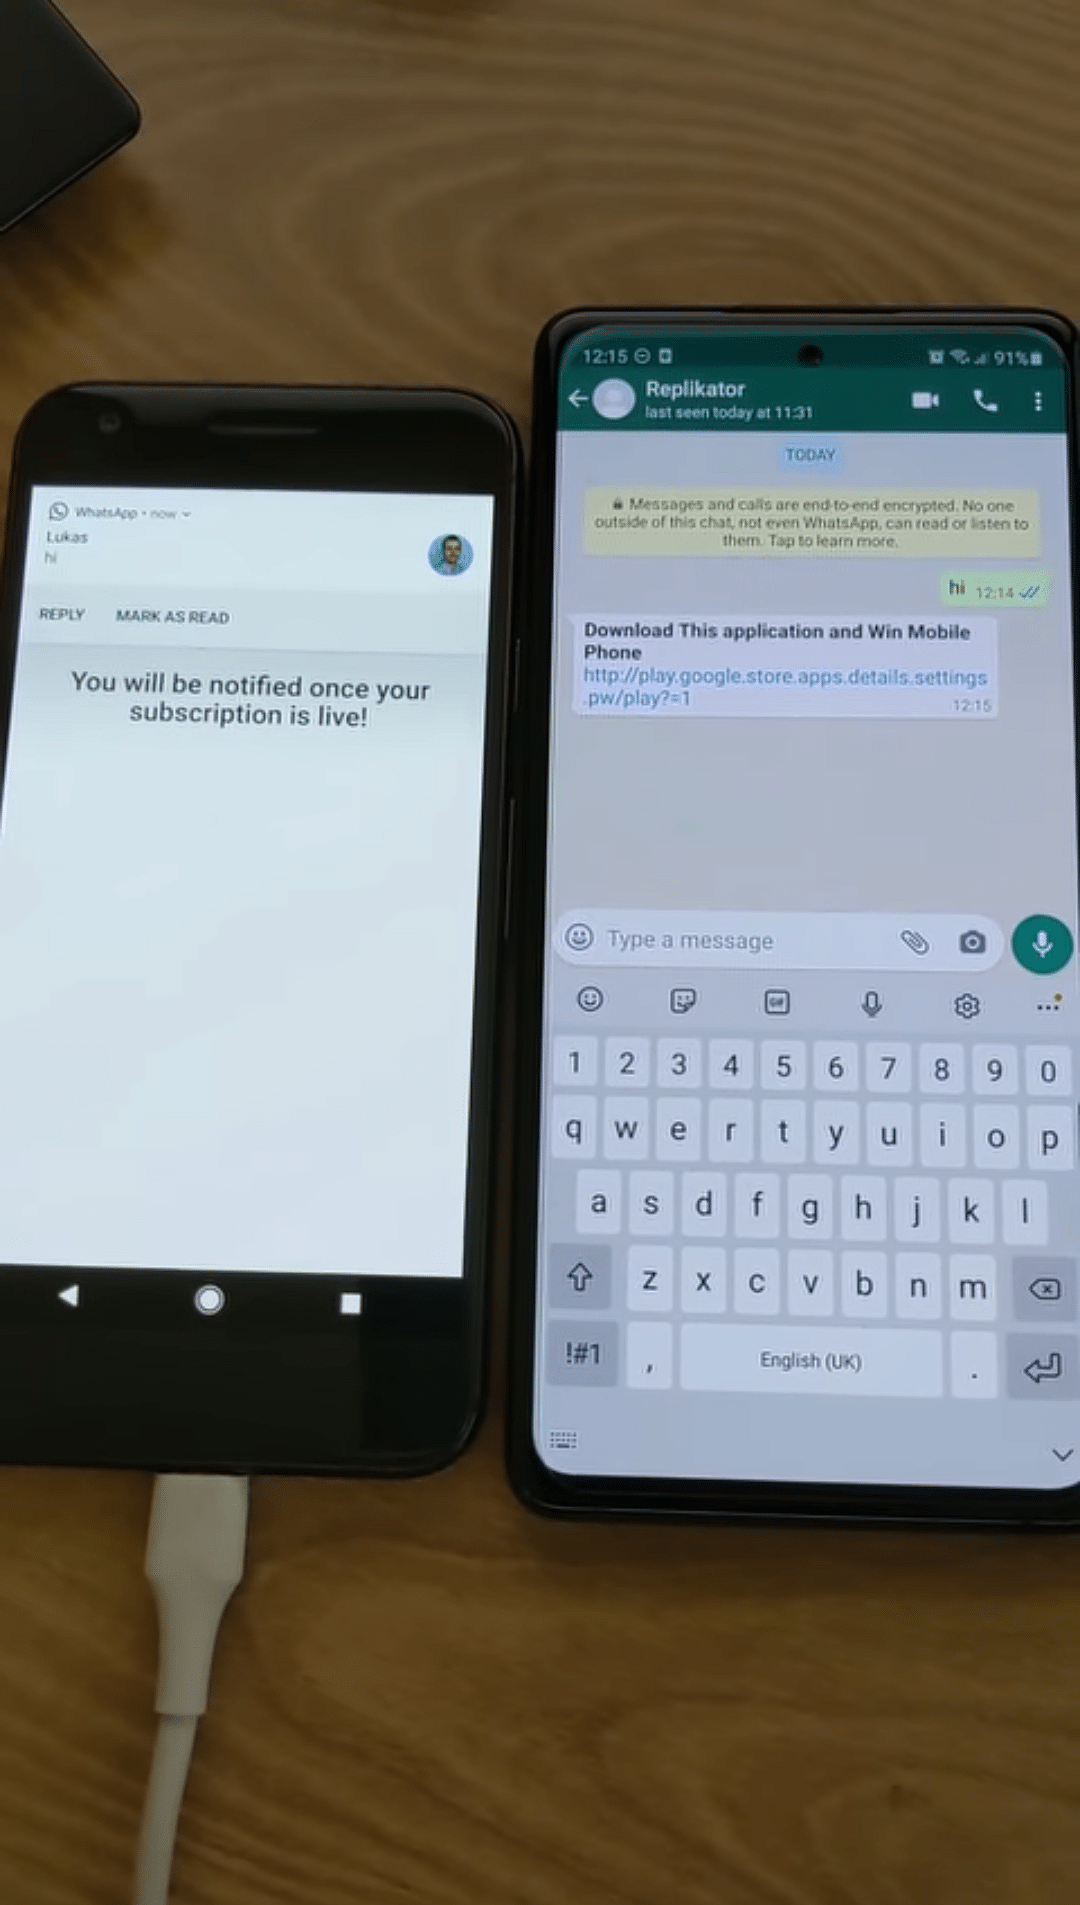 WhatsApp users are being tricked into downloading a phoney app through a message that is being widely shared.  